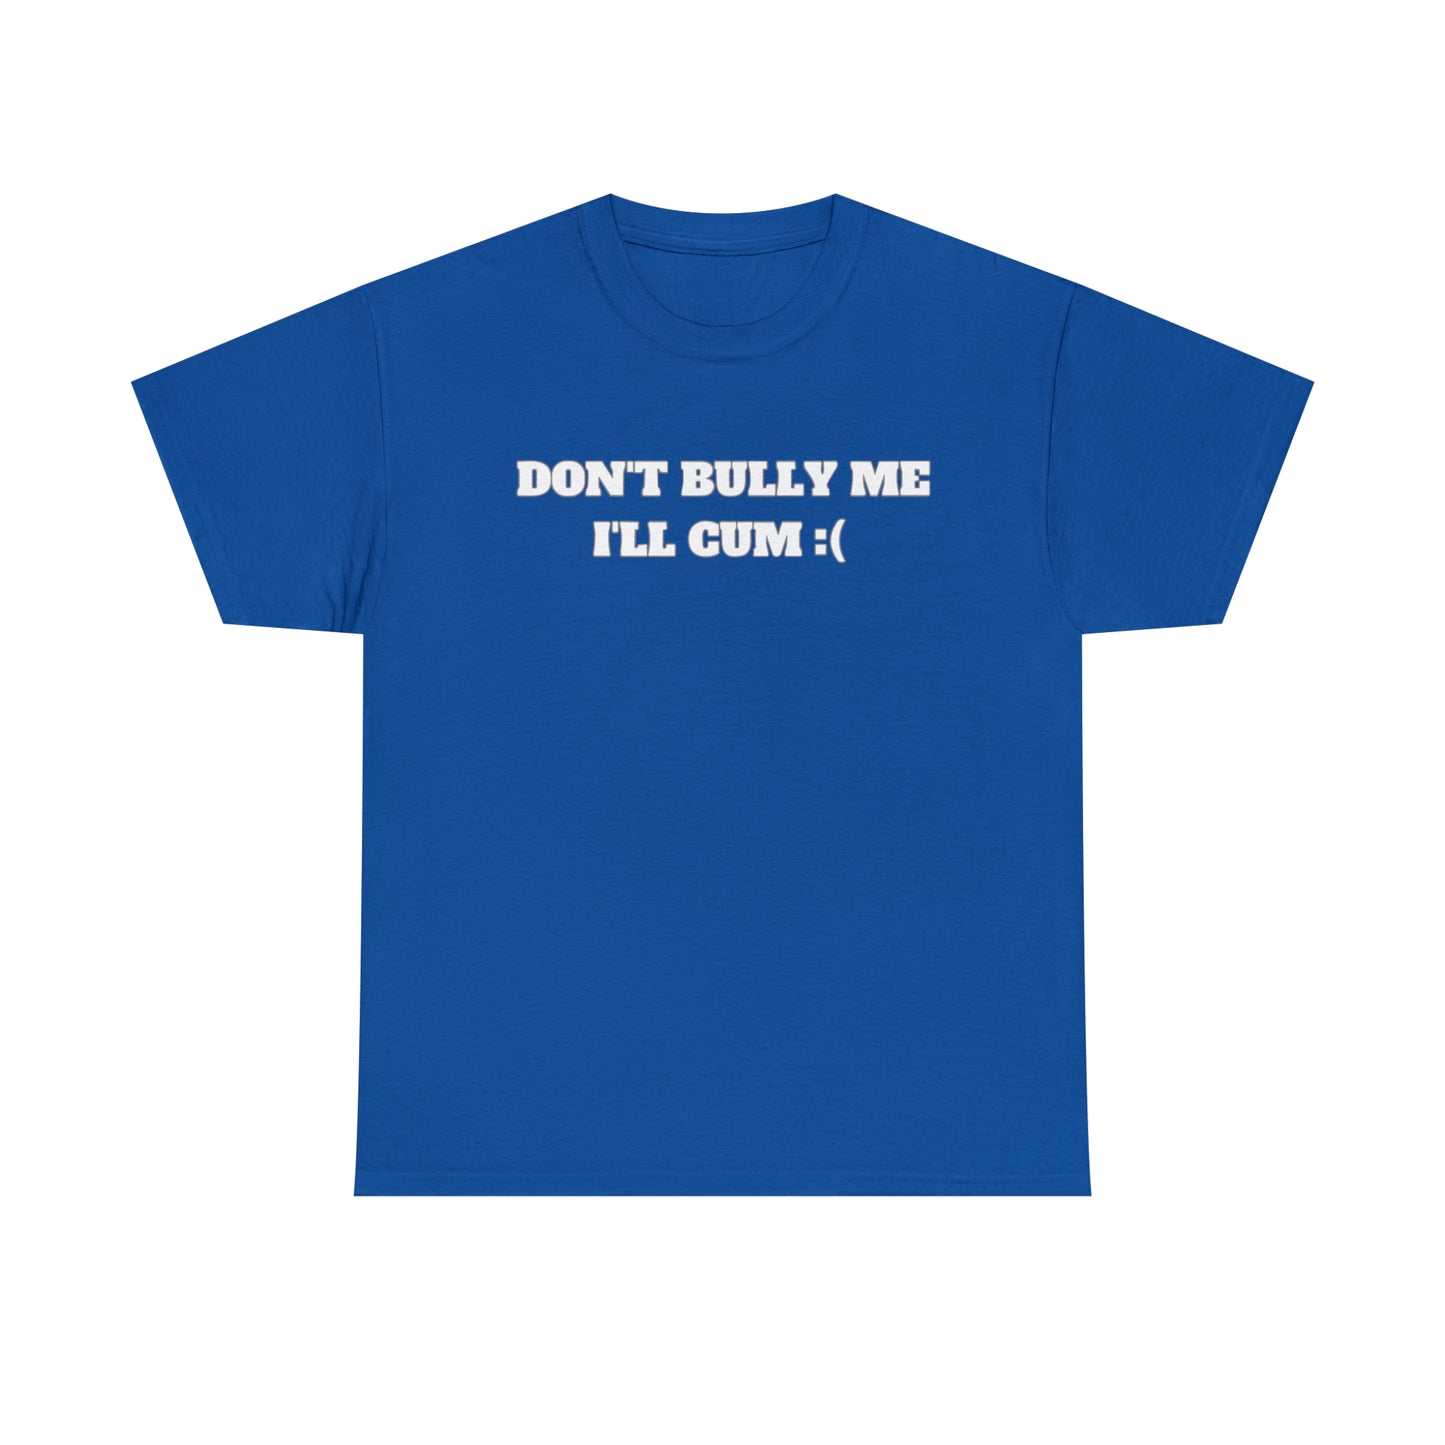 "Don't Bully Me" Tee